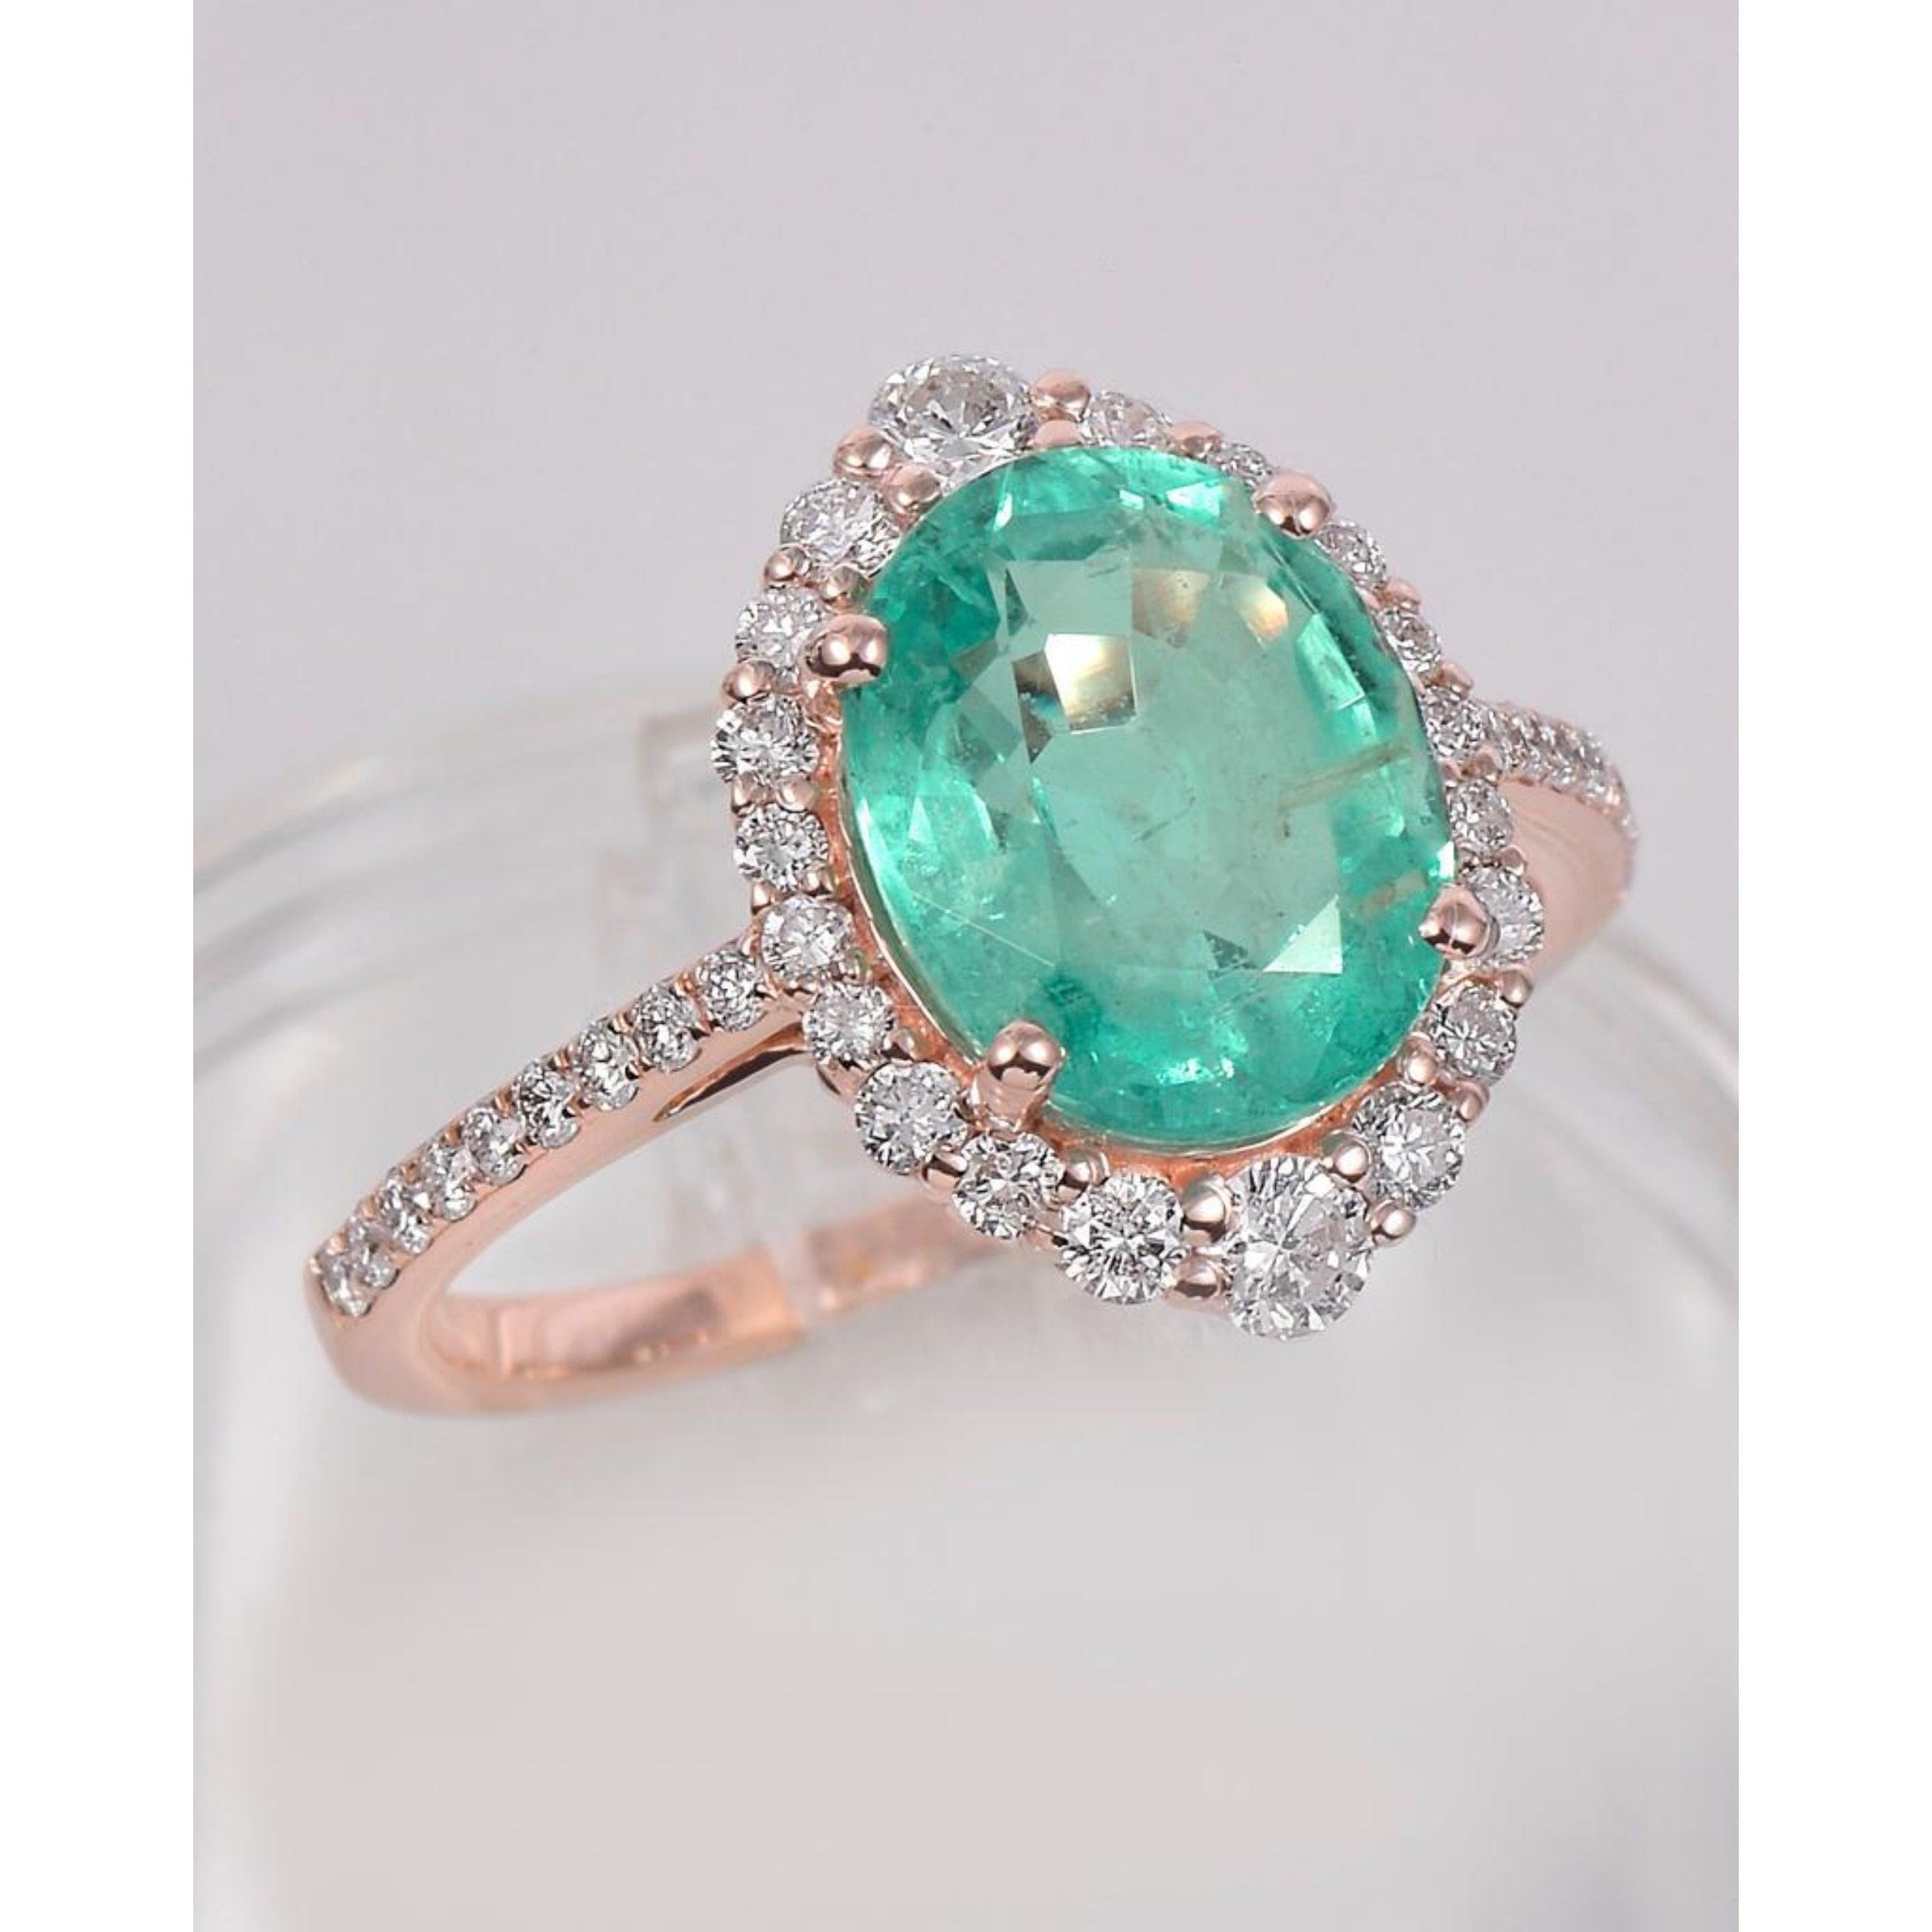 For Sale:  18K Gold 2 CT Natural Emerald and Diamond Antique Art Deco Style Engagement Ring 4